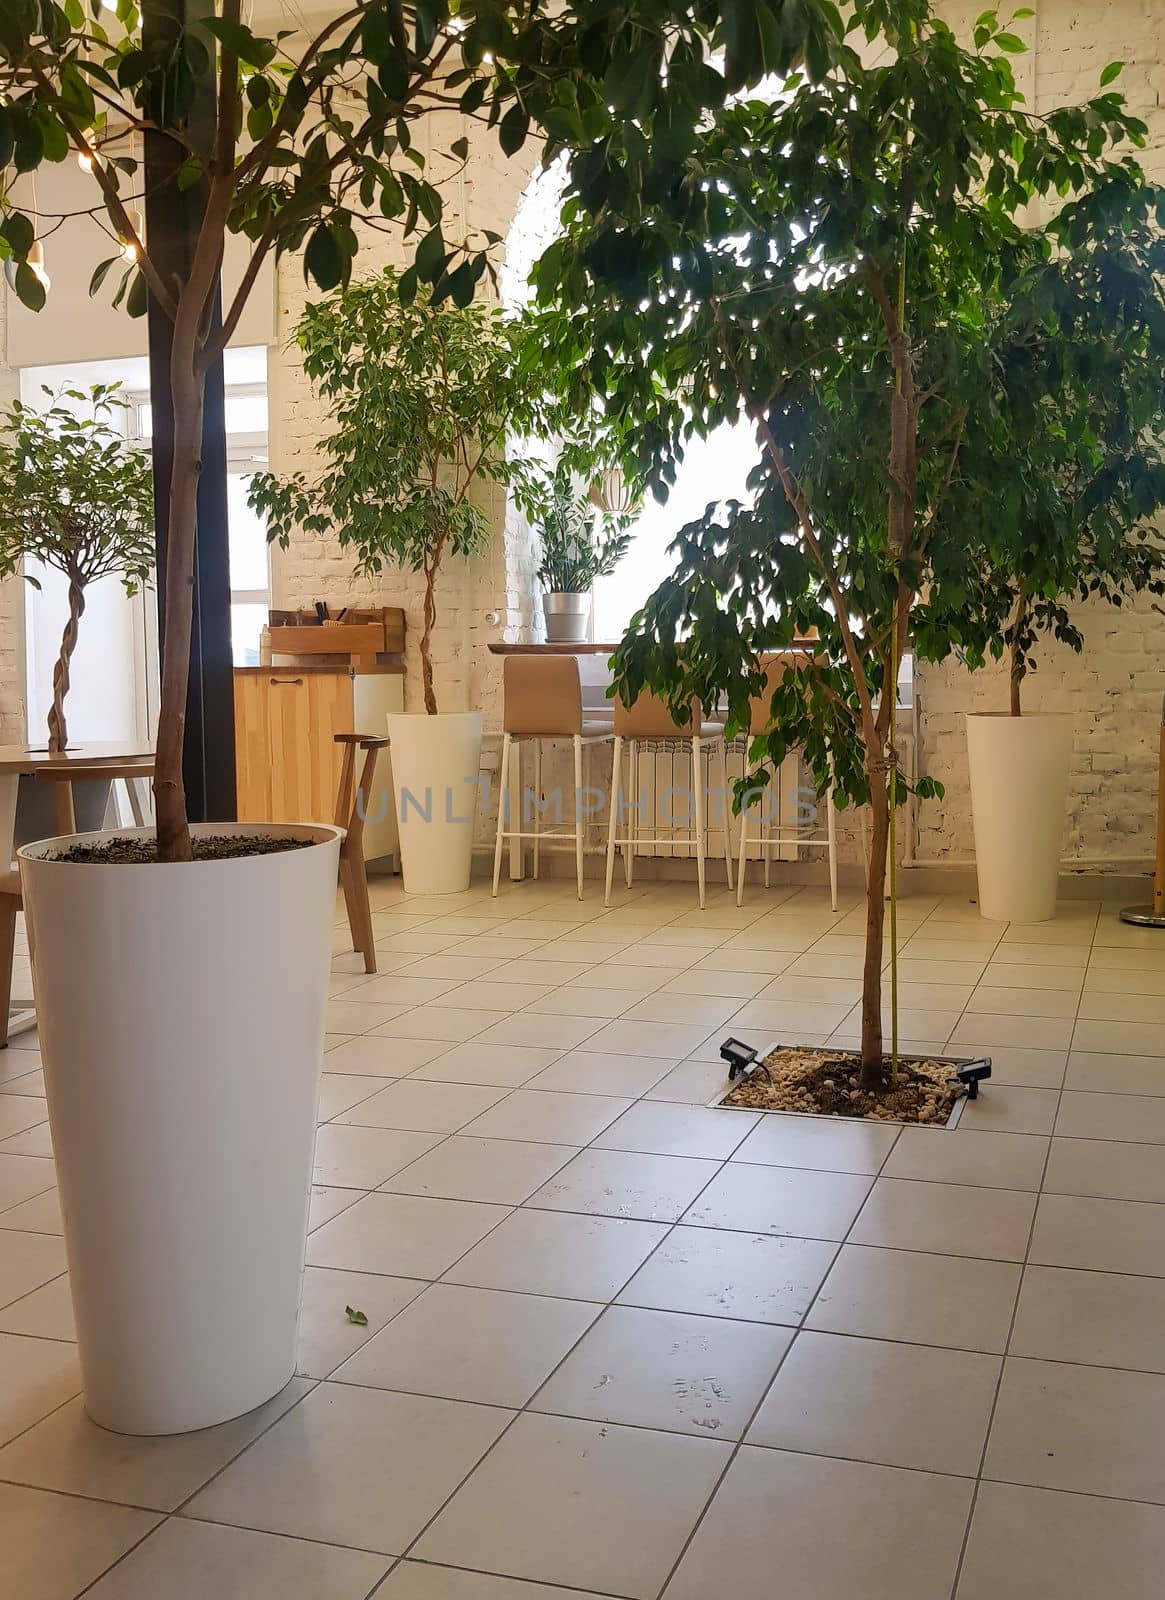 Cozy interior of a modern cafe with plants, chairs. A large pot with plants in the foreground of the vertical photo.